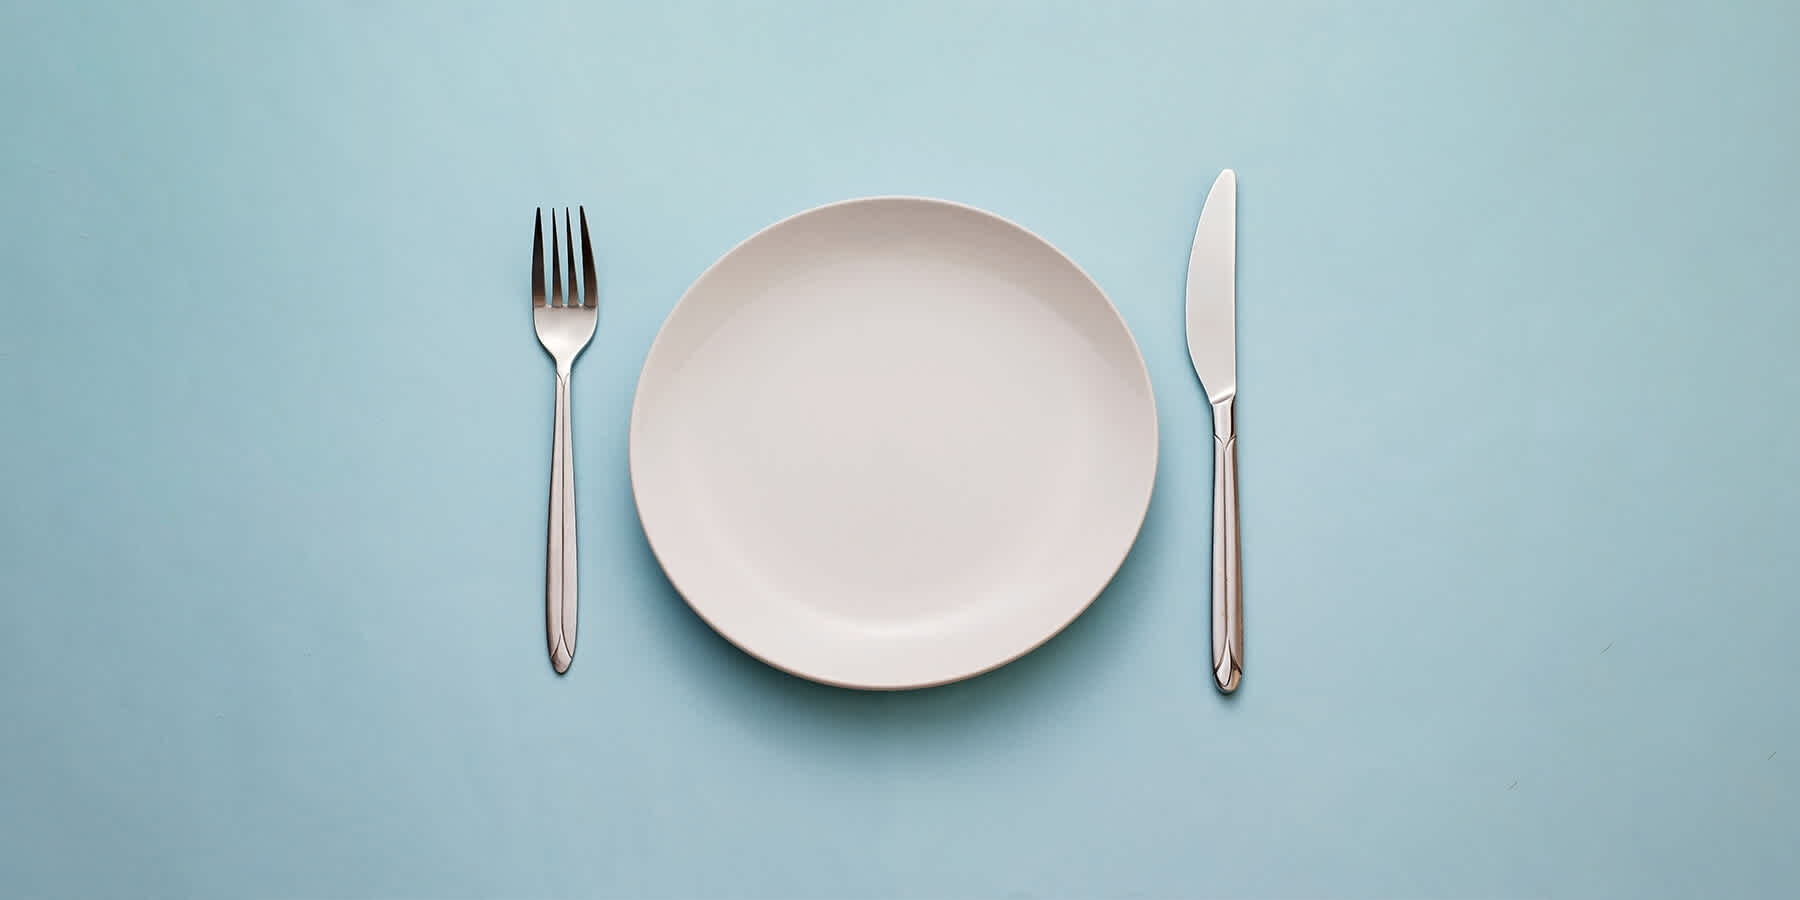 Empty plate and silverware on blue background